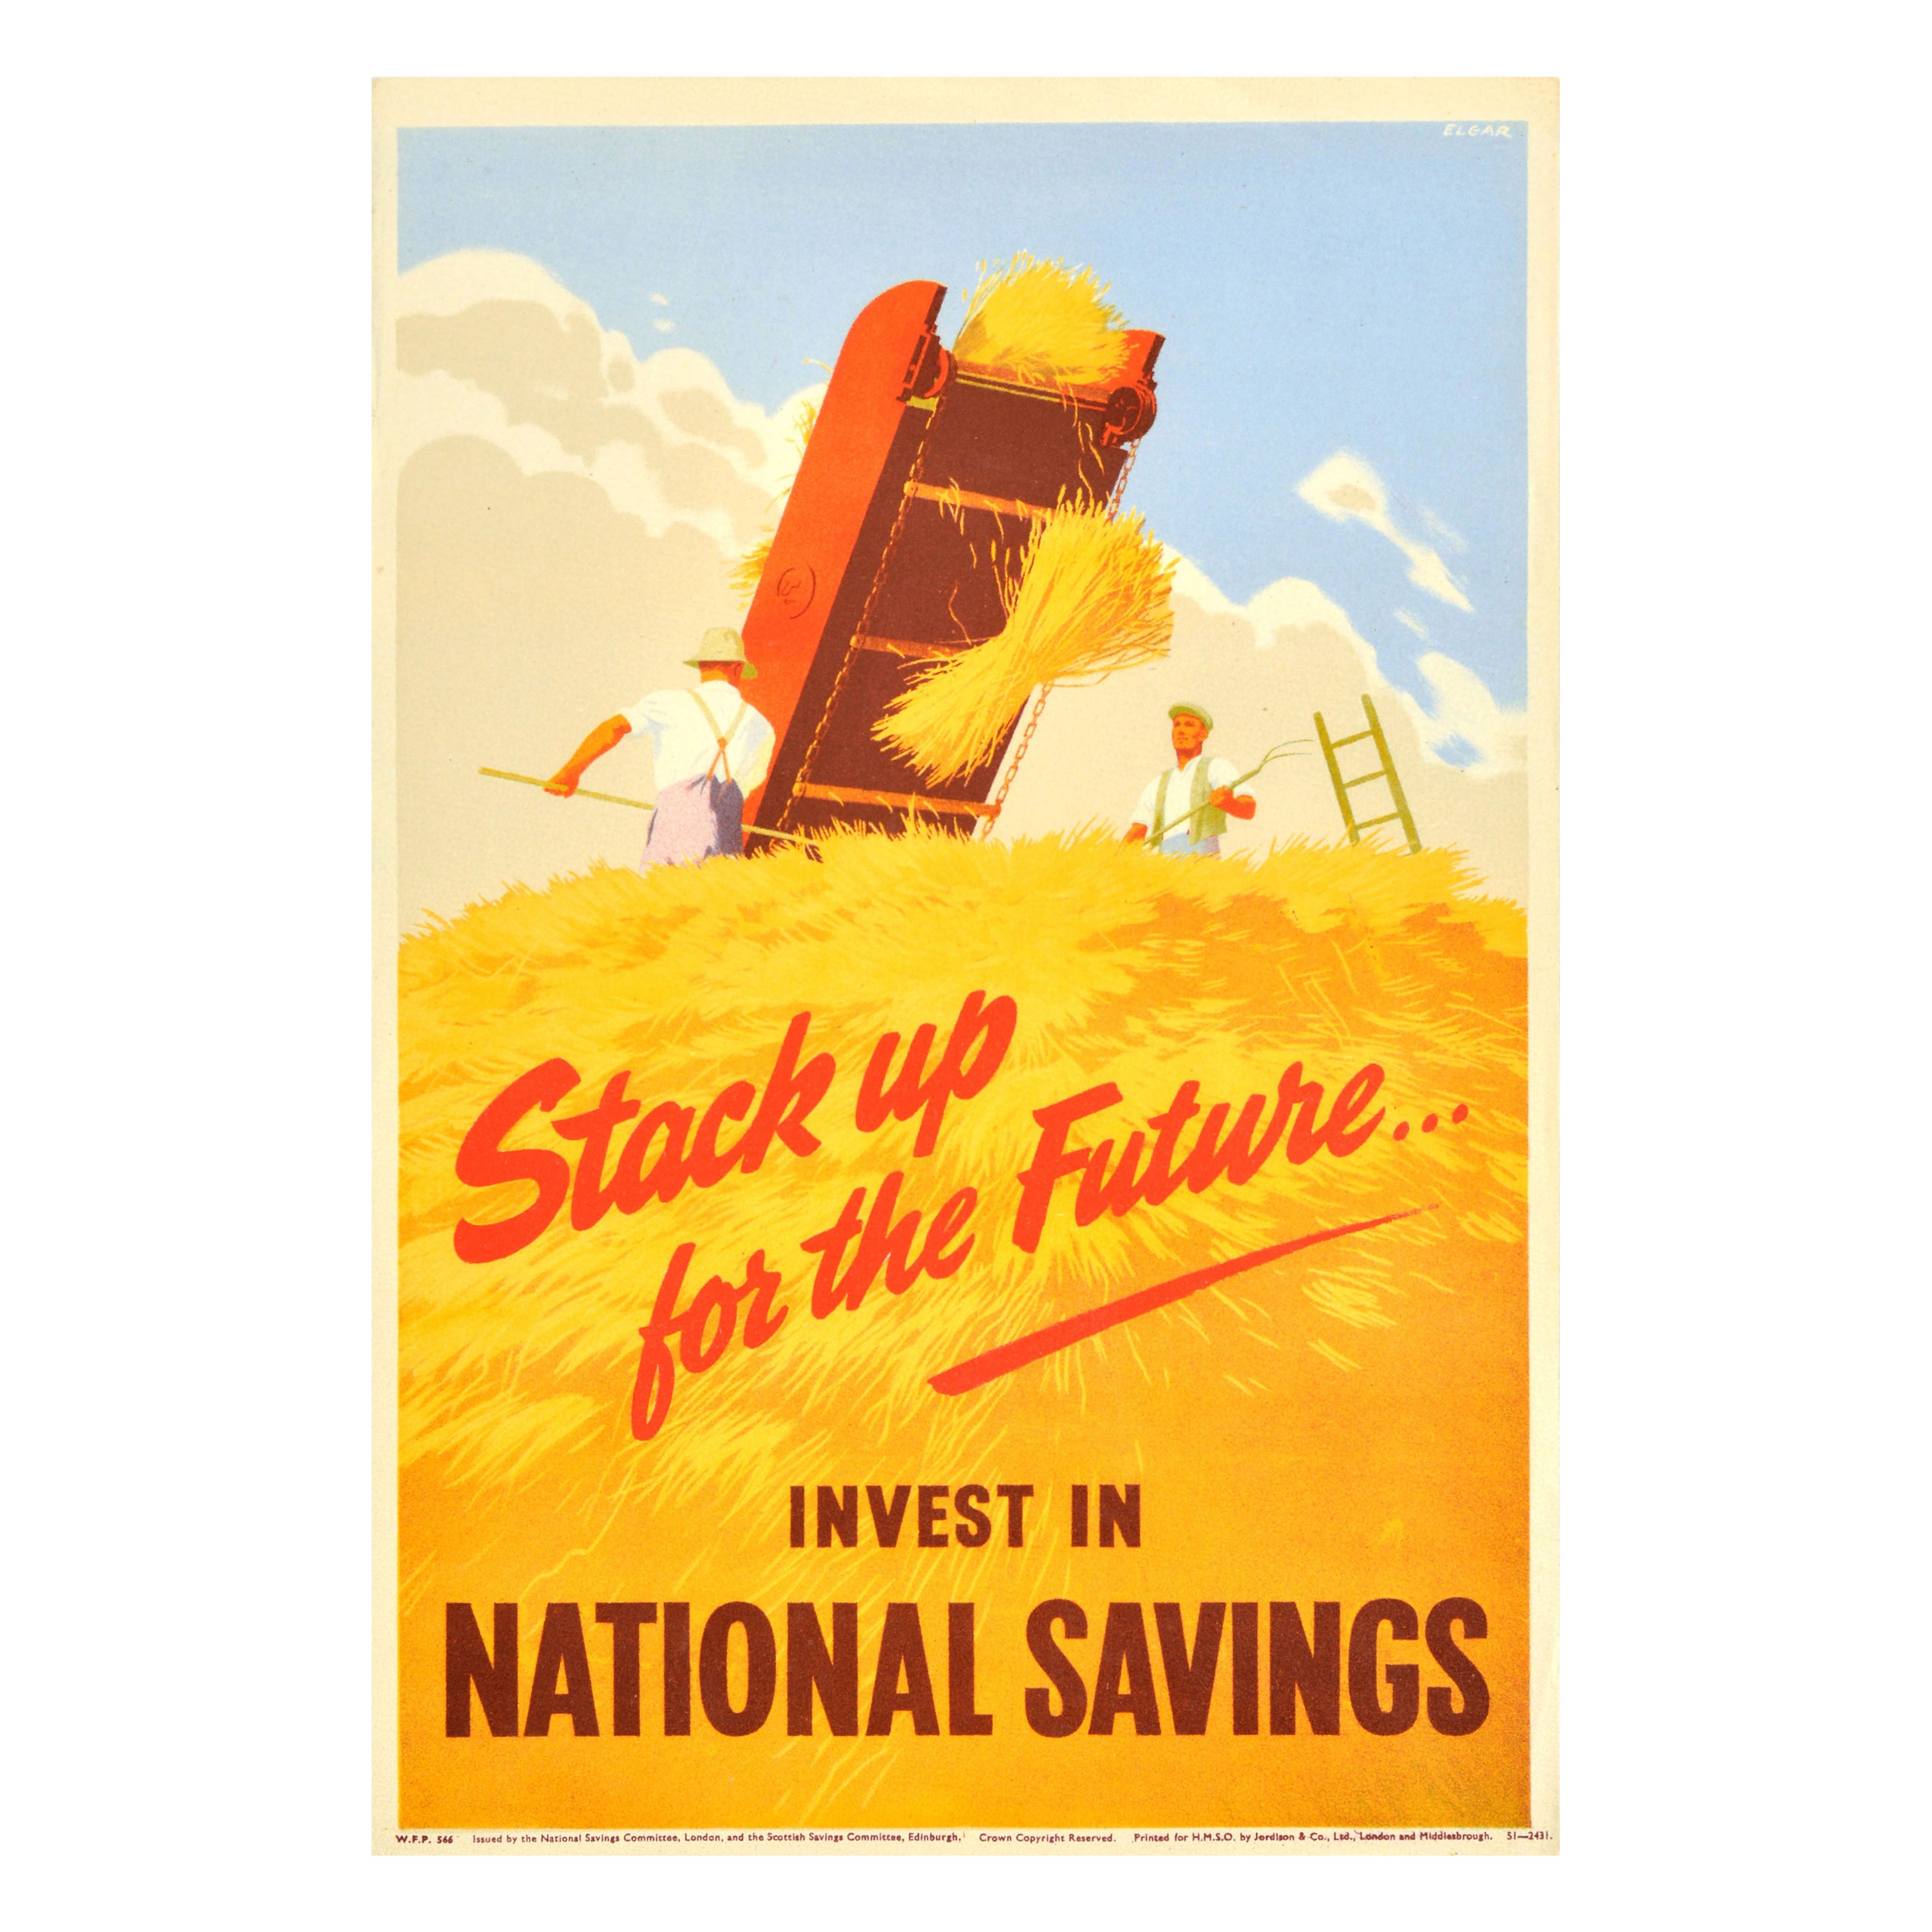 Original Vintage Advertising Poster Stack Up For The Future National Savings For Sale